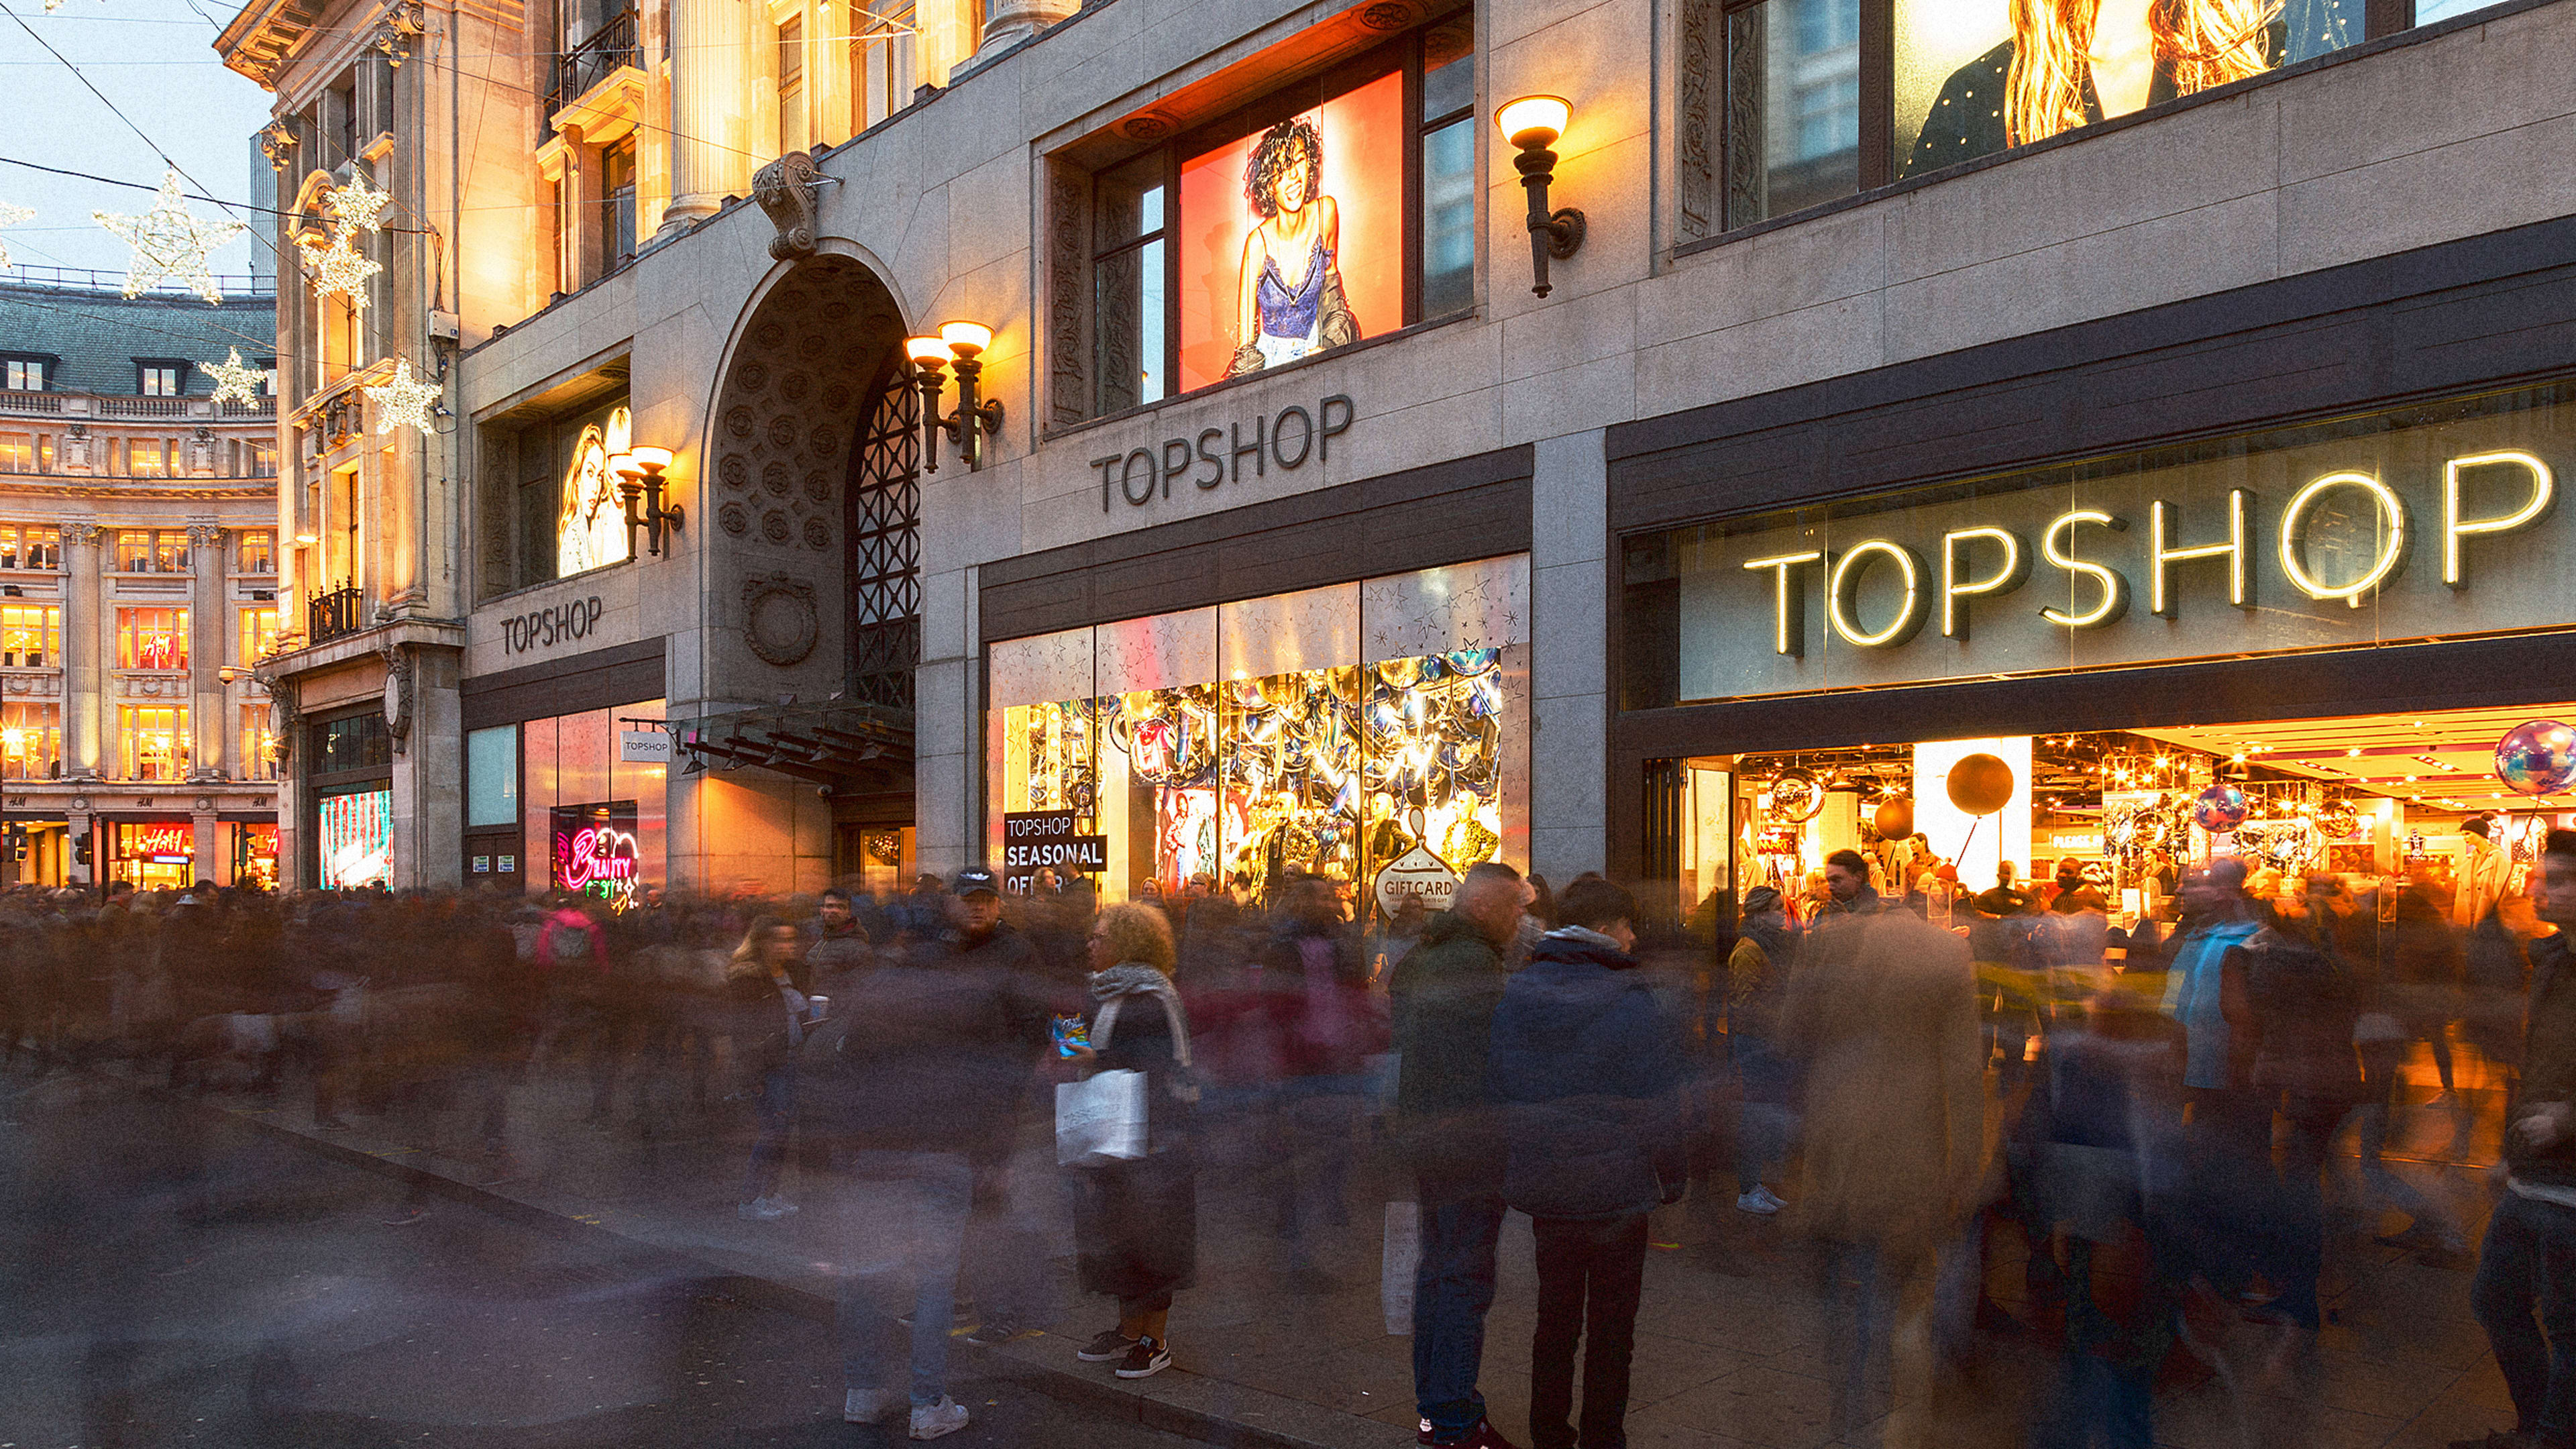 Where Topshop went wrong